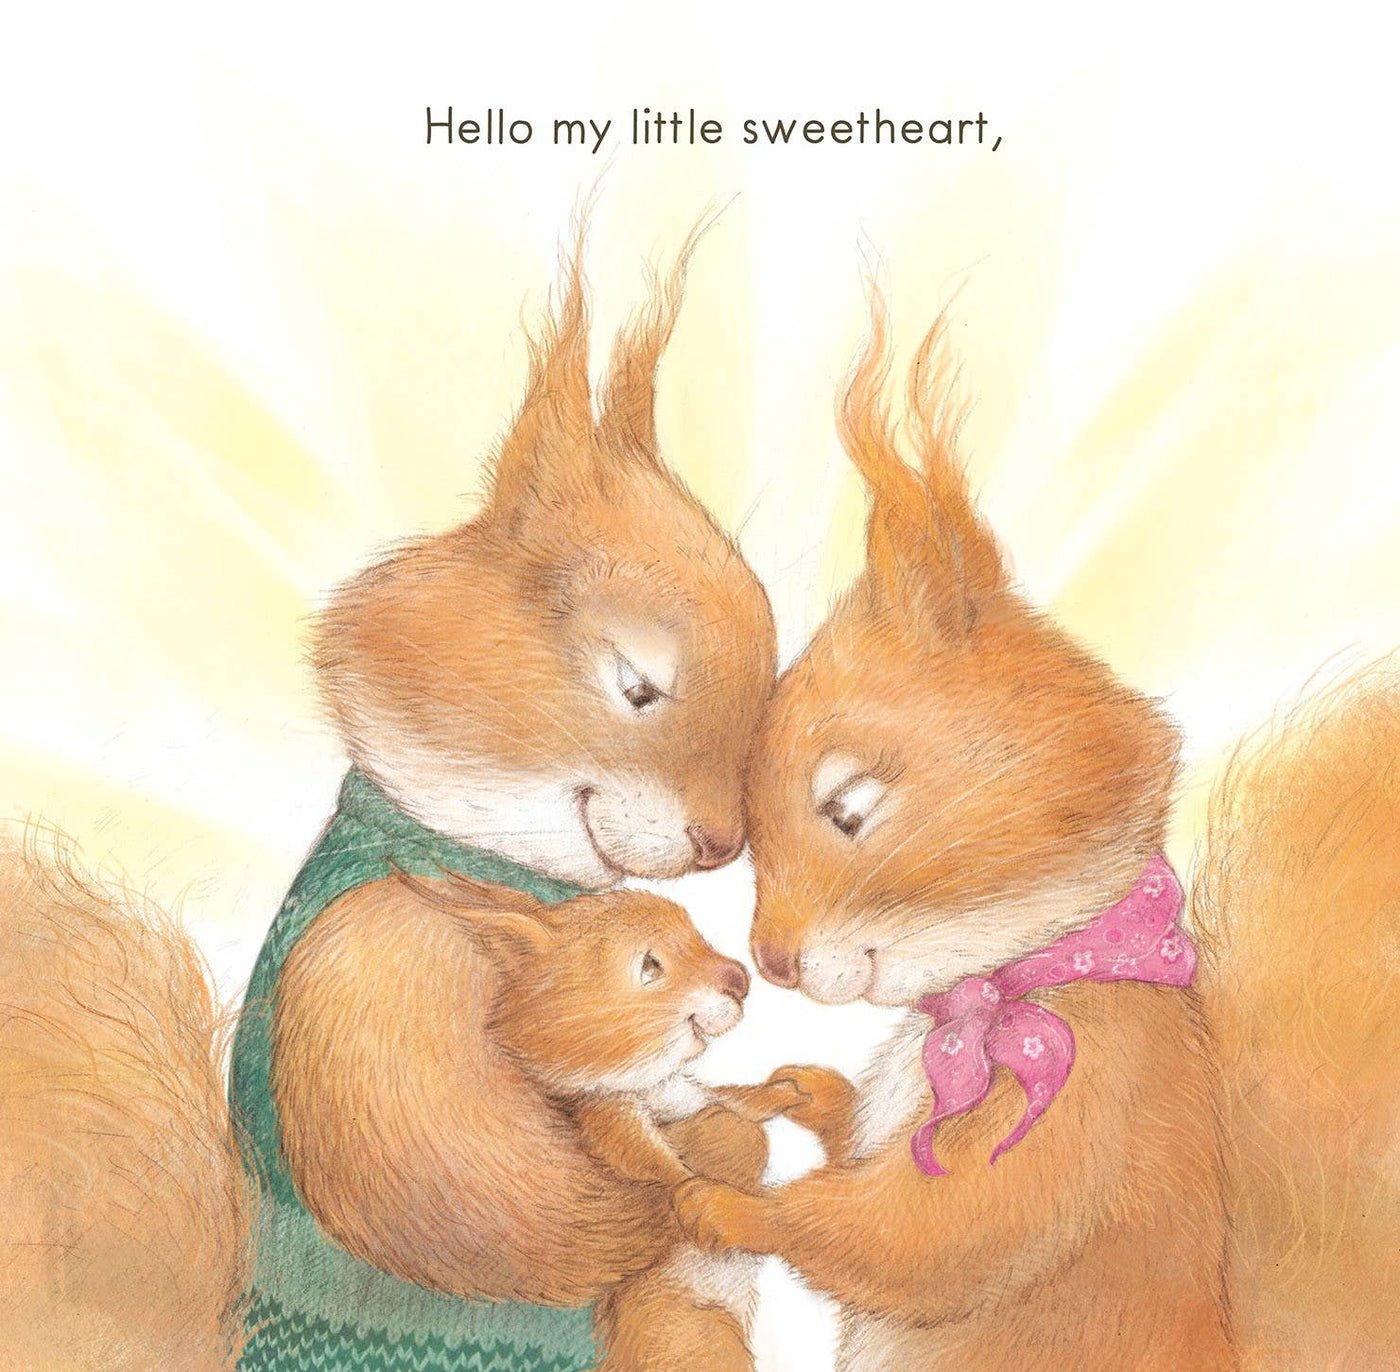 Welcome to the World hardcover picture book